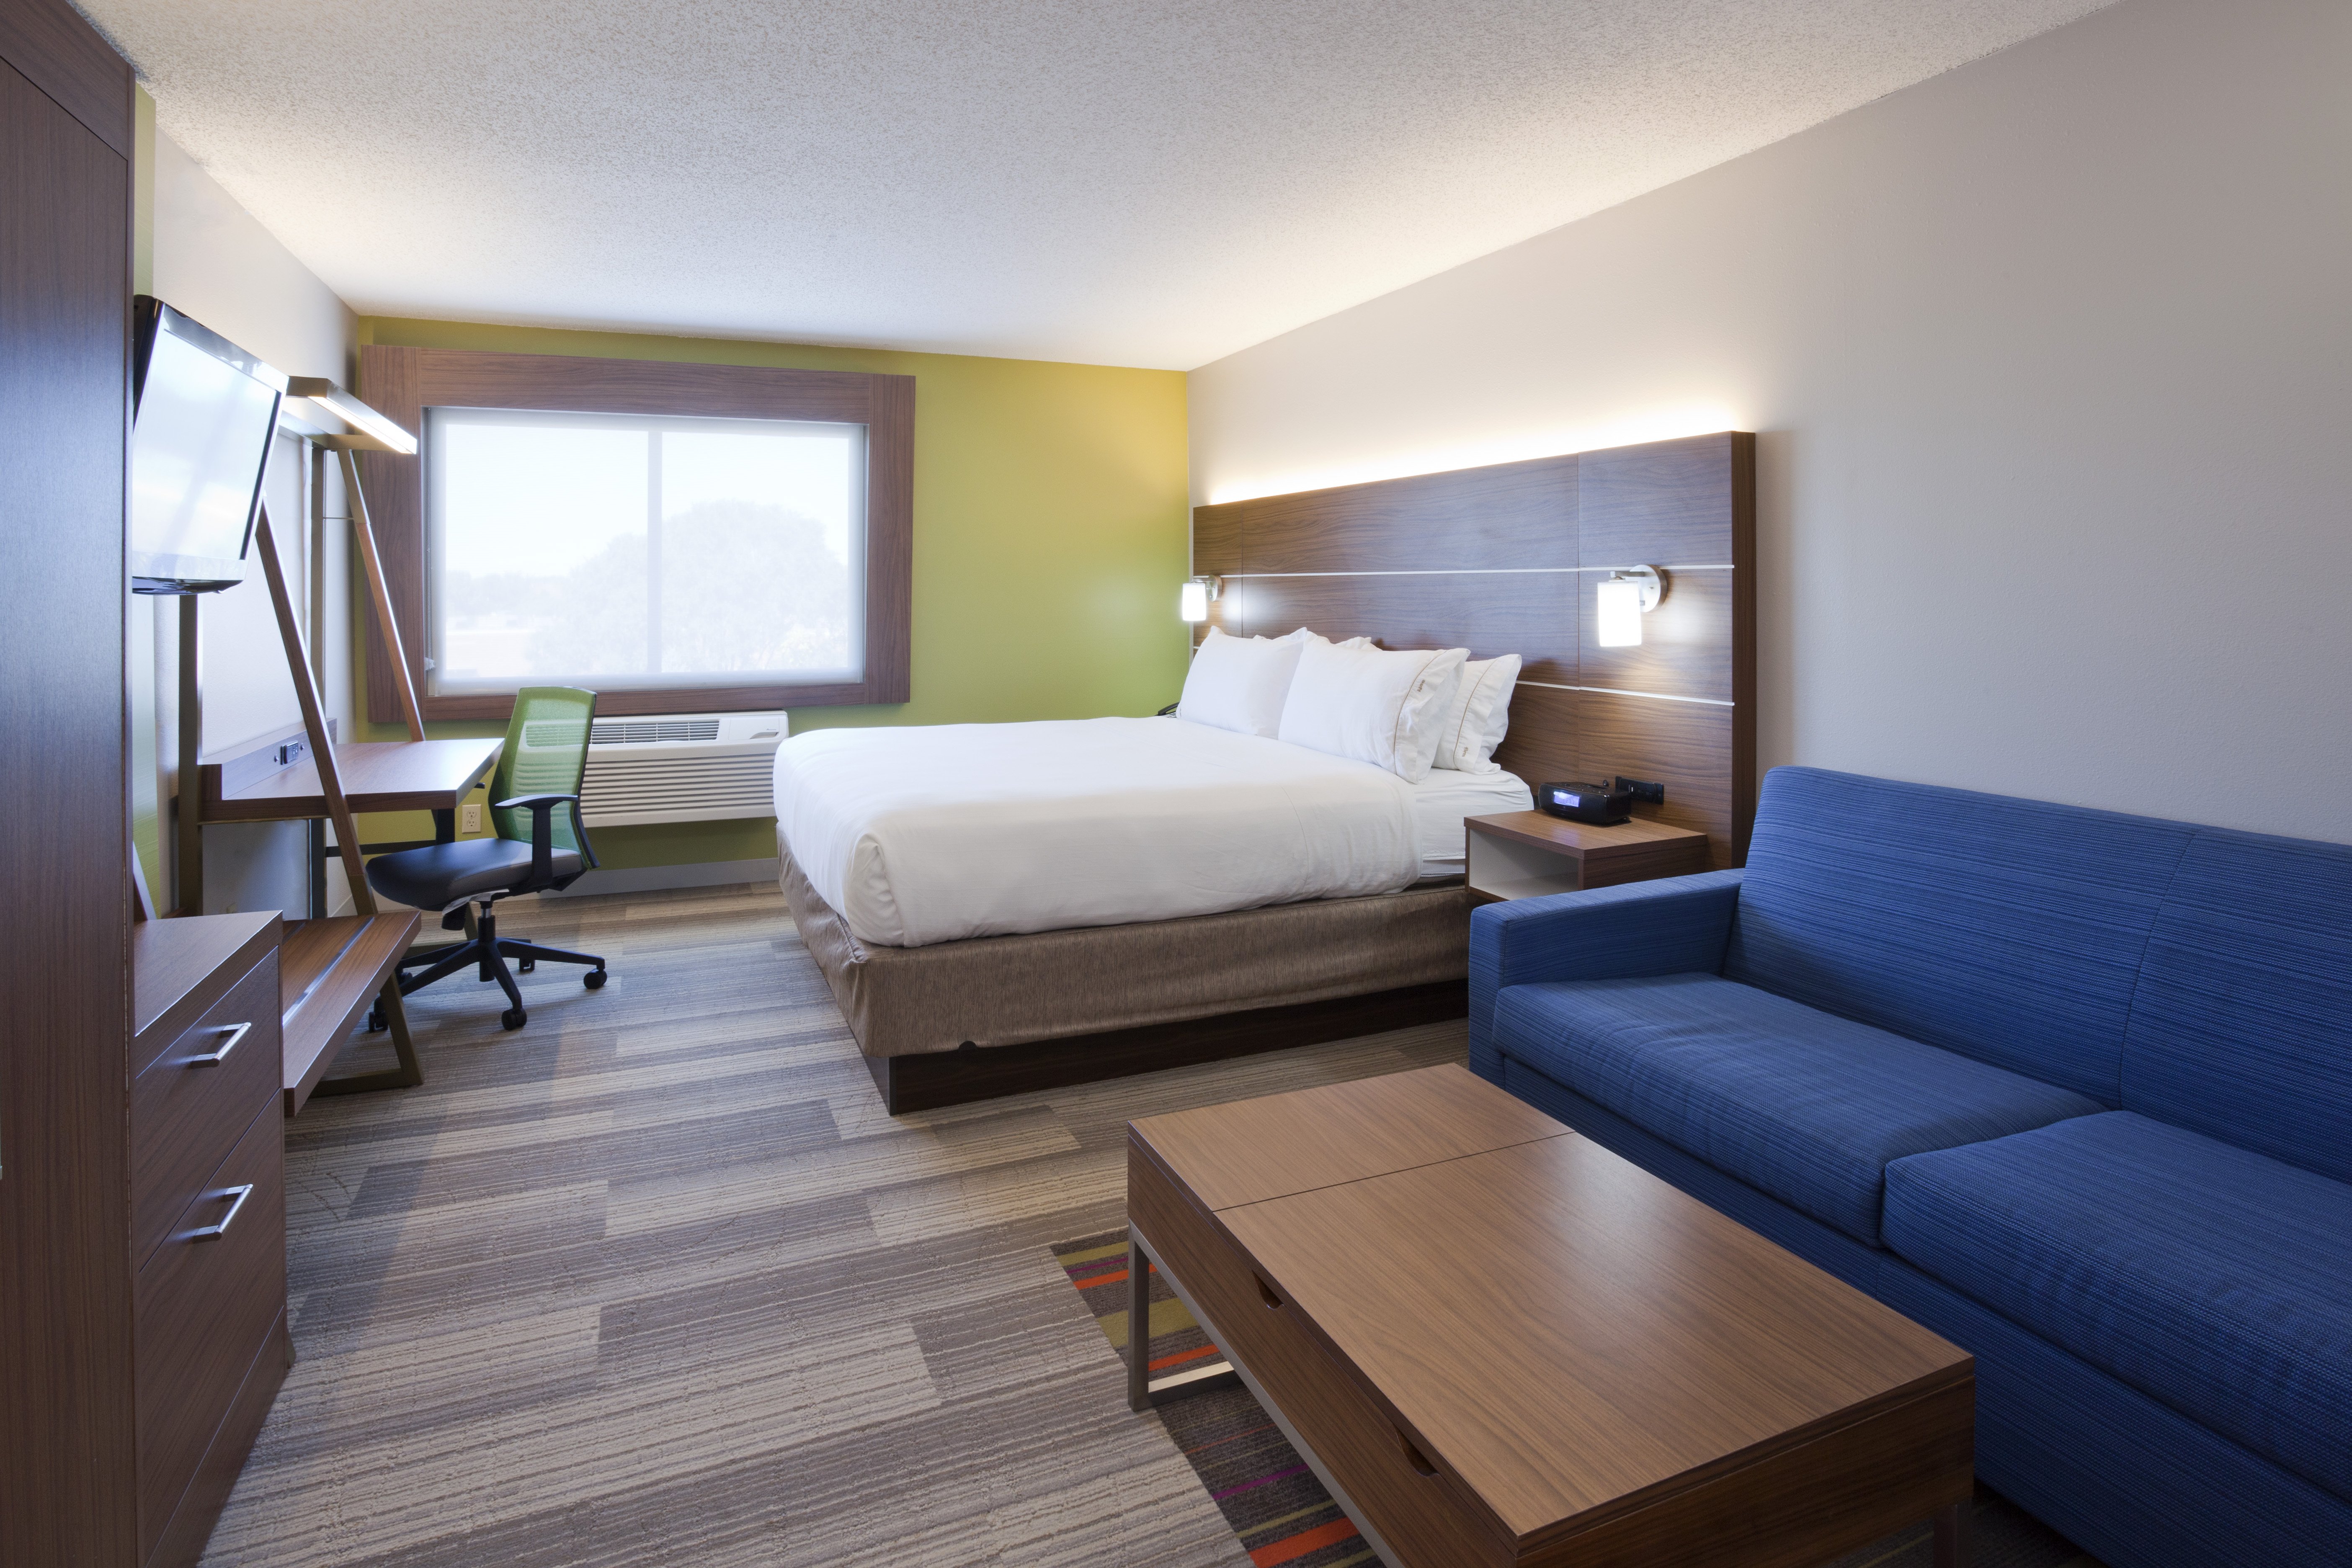 Our Minneapolis location offers modern King rooms with sofa beds